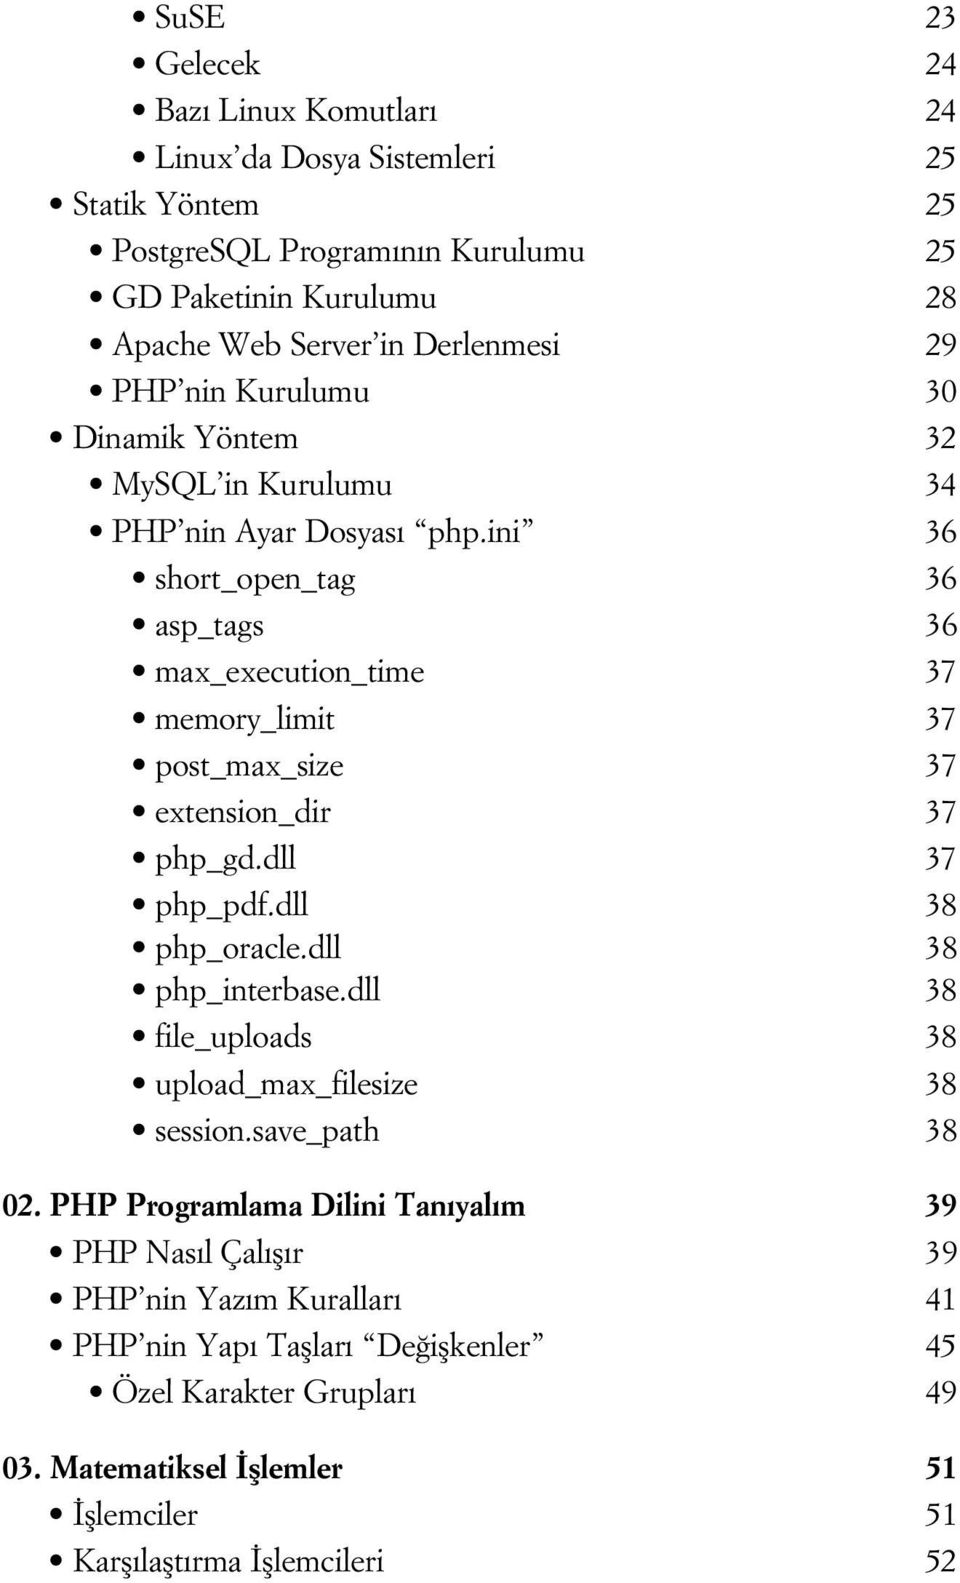 ini 36 short_open_tag 36 asp_tags 36 max_execution_time 37 memory_limit 37 post_max_size 37 extension_dir 37 php_gd.dll 37 php_pdf.dll 38 php_oracle.dll 38 php_interbase.